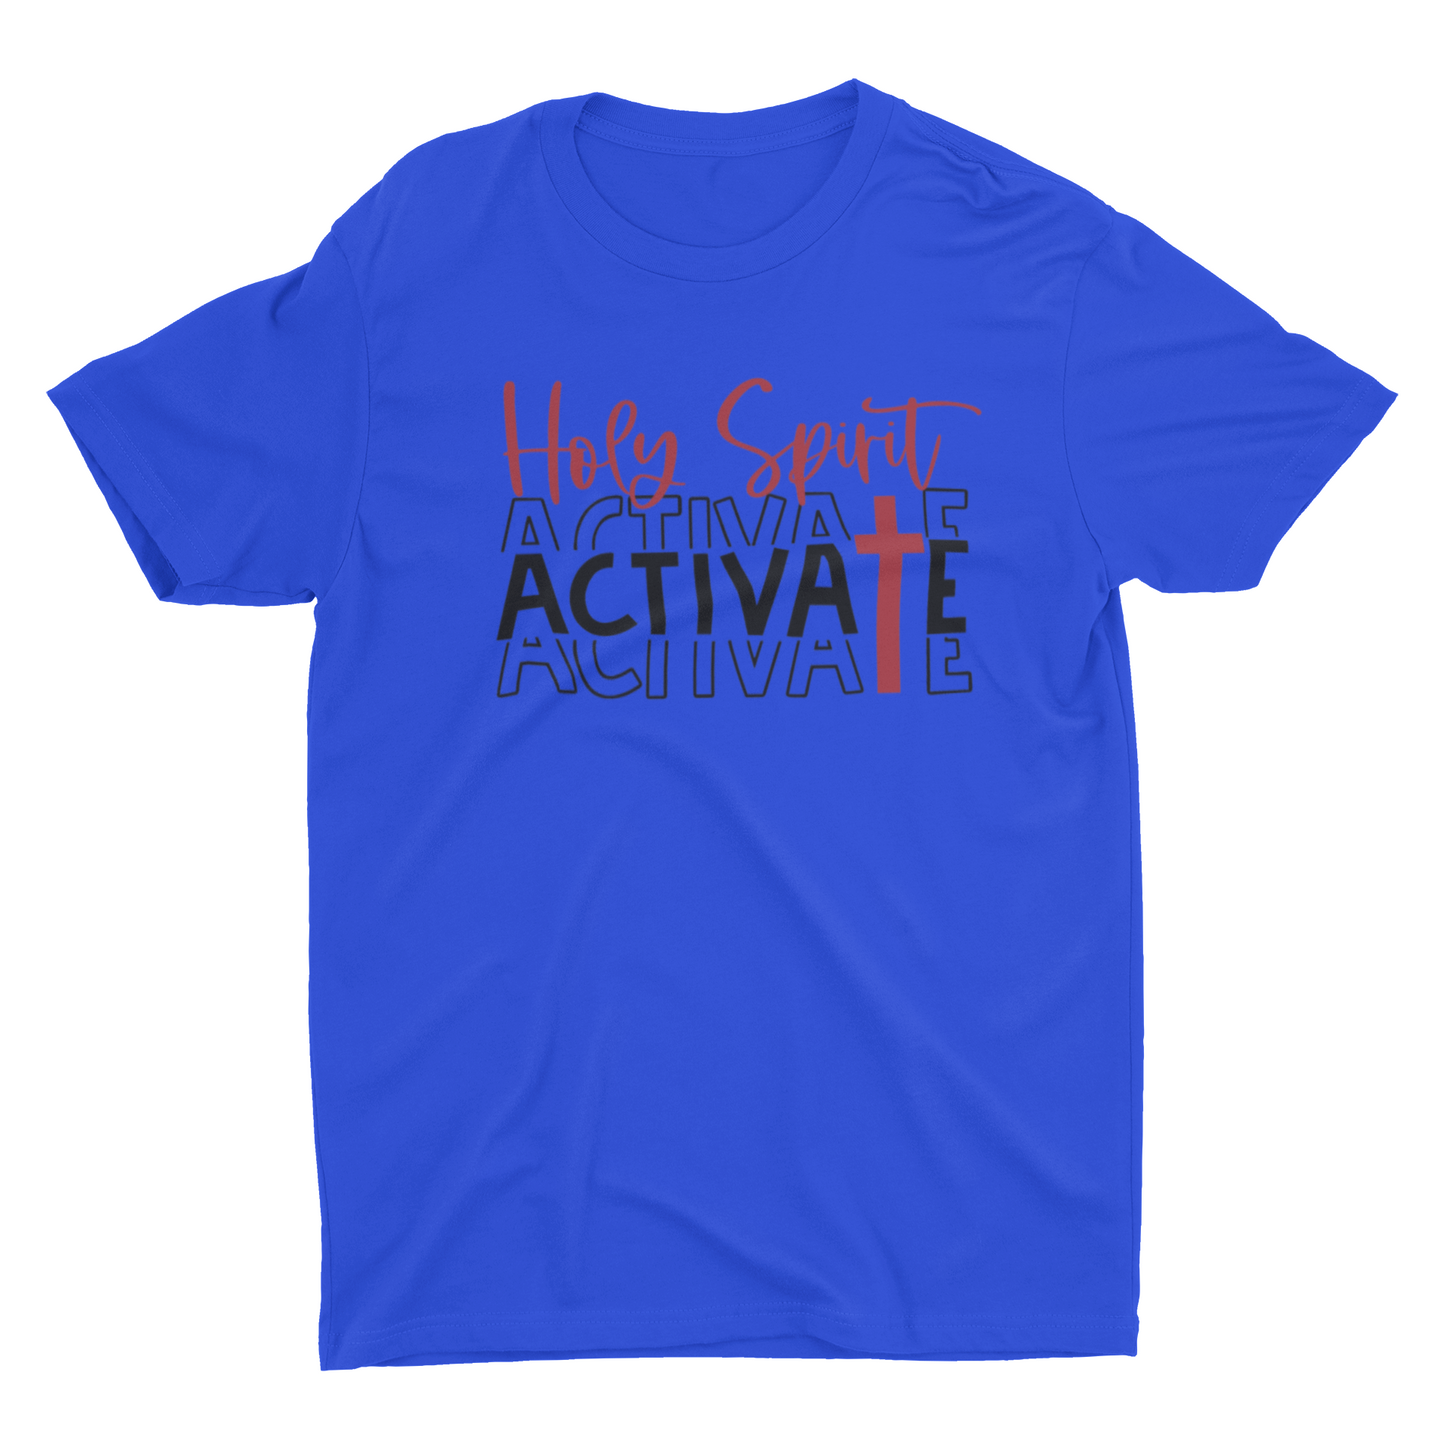 Holy Spirit Activate Tee (Red)